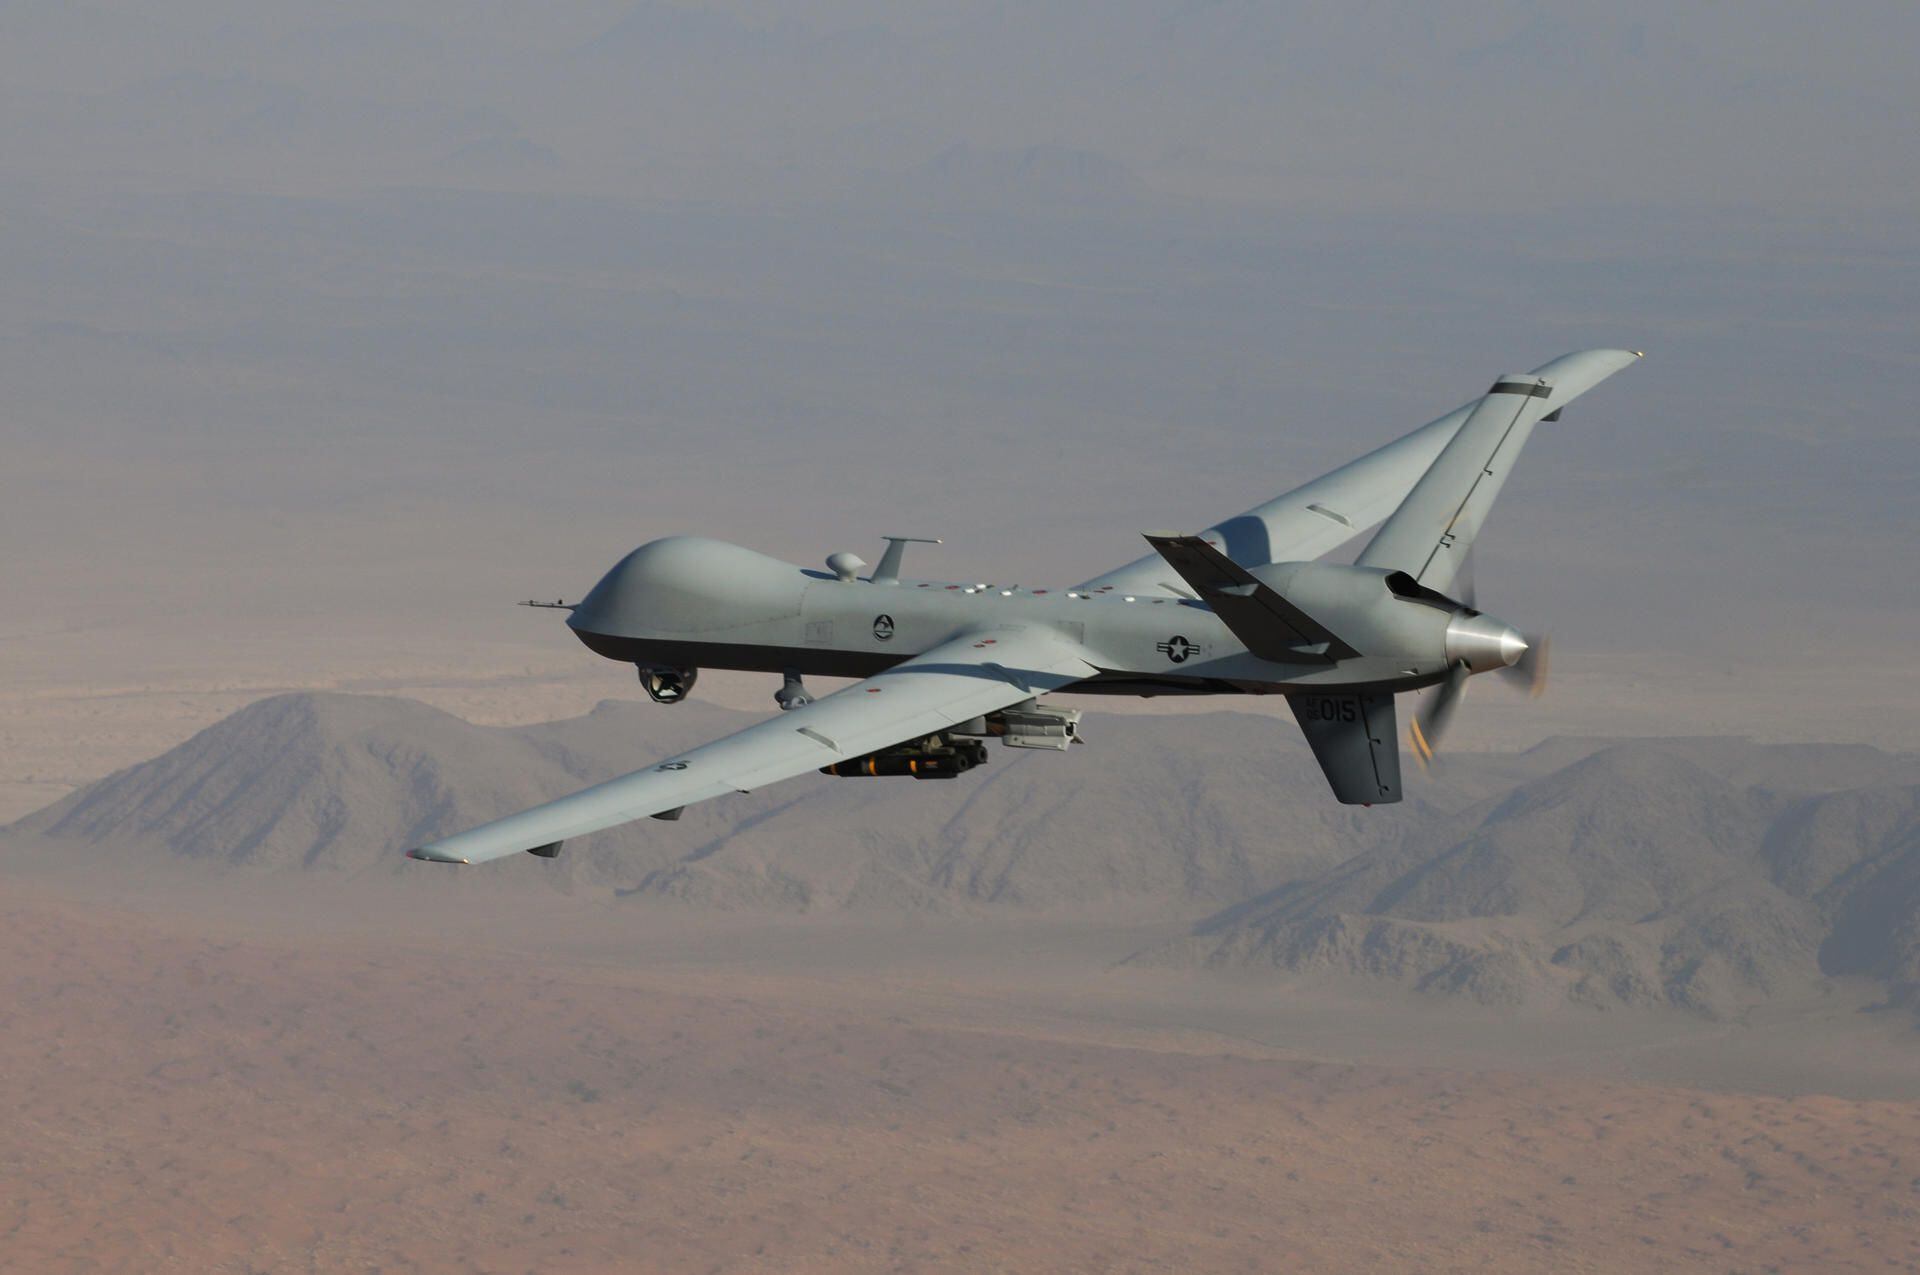 An MQ-9 Reaper drone, armed with GBU-12 Paveway II laser-guided munitions and AGM-114 Hellfire missiles, during a combat mission over southern Afghanistan.  (EFE/Leslie Pratt/US Air Force).